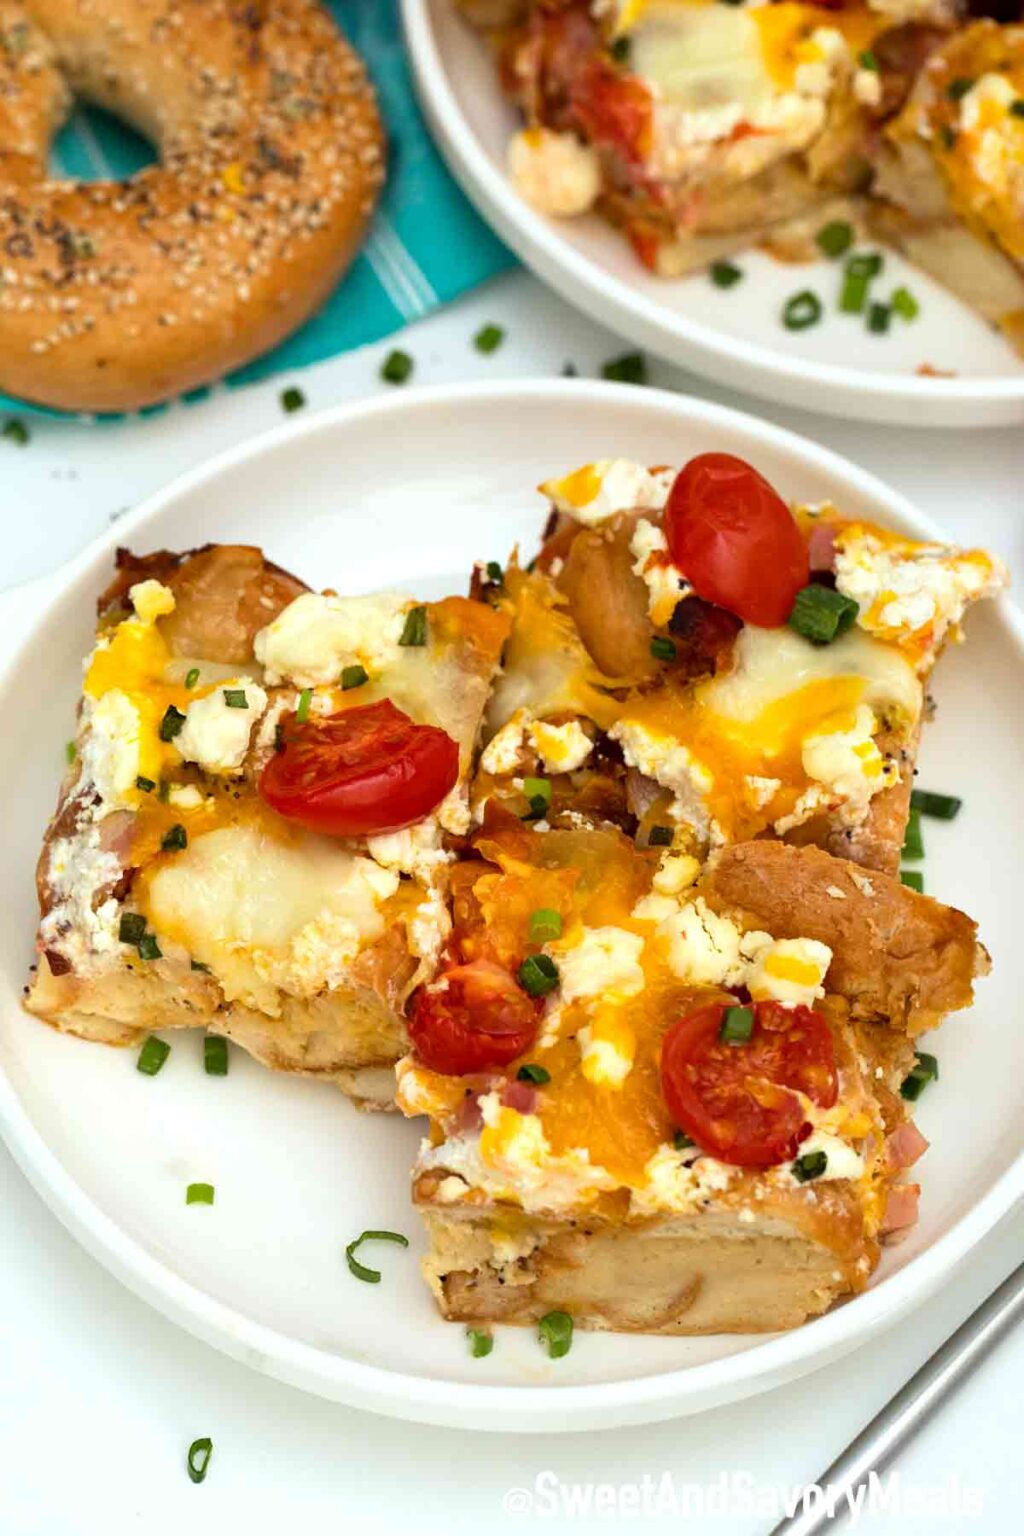 Everything Bagel Casserole Recipe [Video] - Sweet and Savory Meals